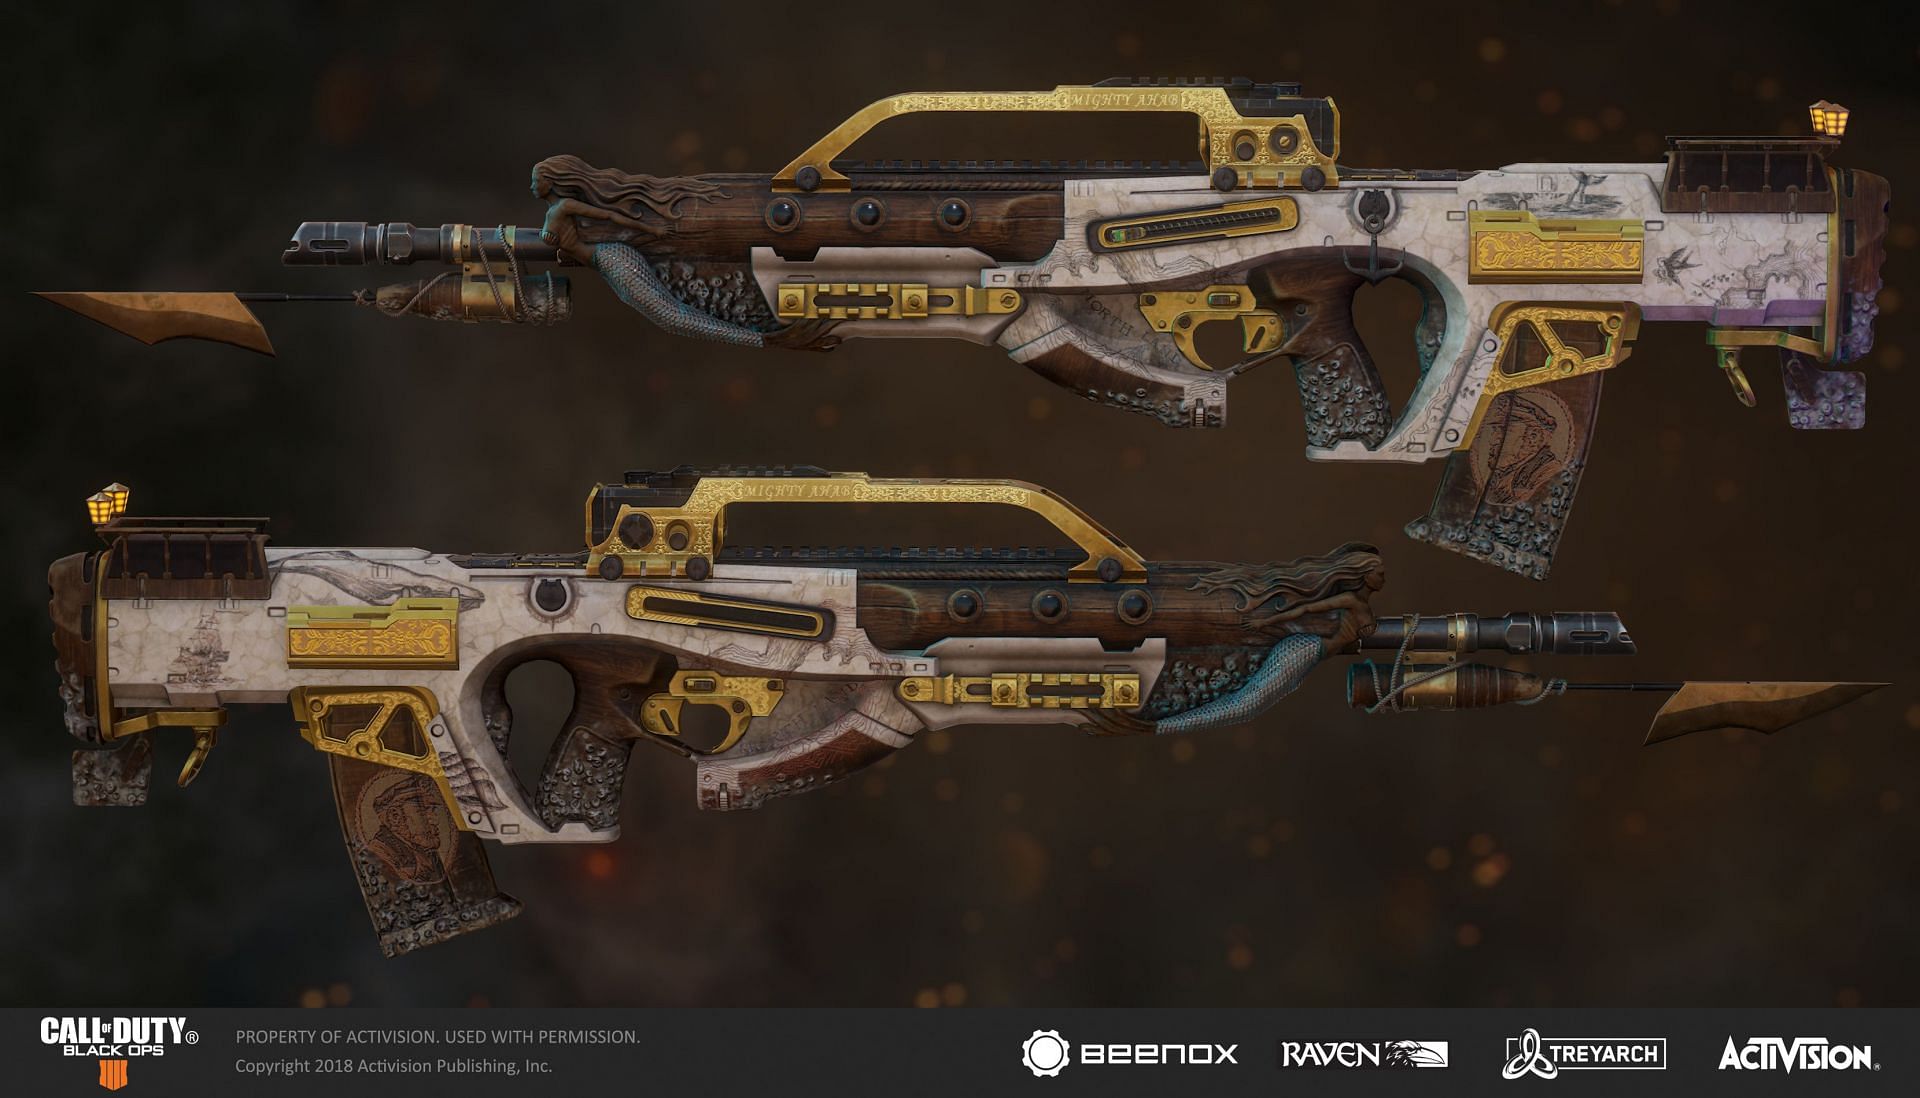 The Swordfish tactical rifle from Black Ops 4 is coming to COD Mobile in Season 9 (Image via Activition)